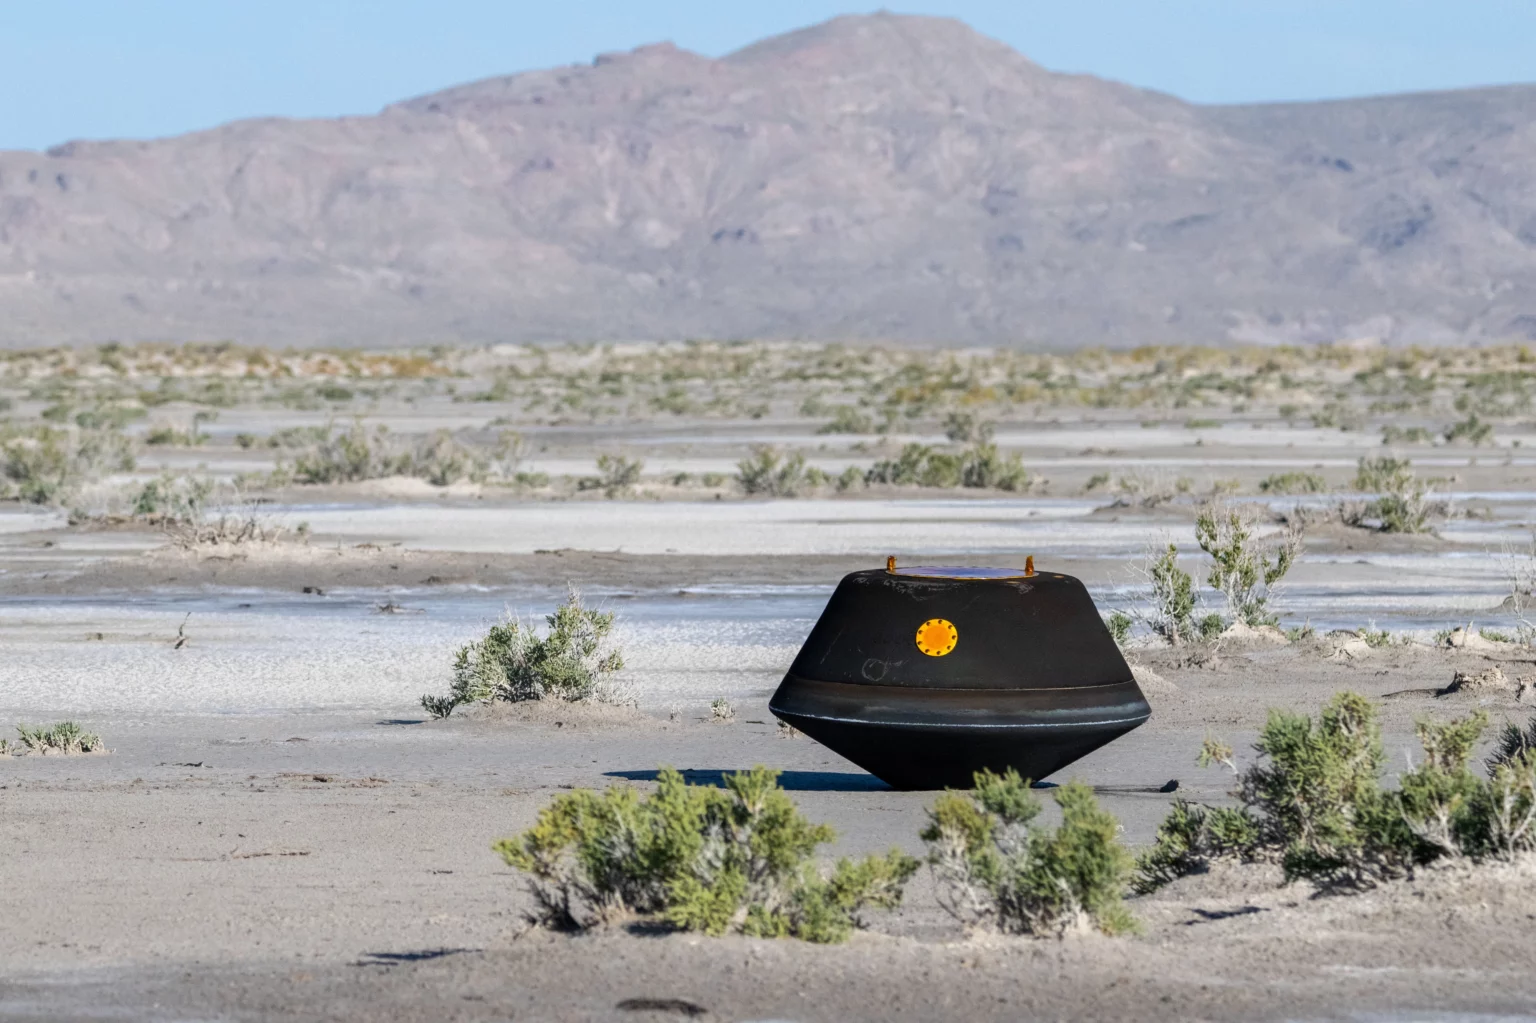 carrying-the-largest-asteroid-samples-the-nasa-capsule-lands-on-earth